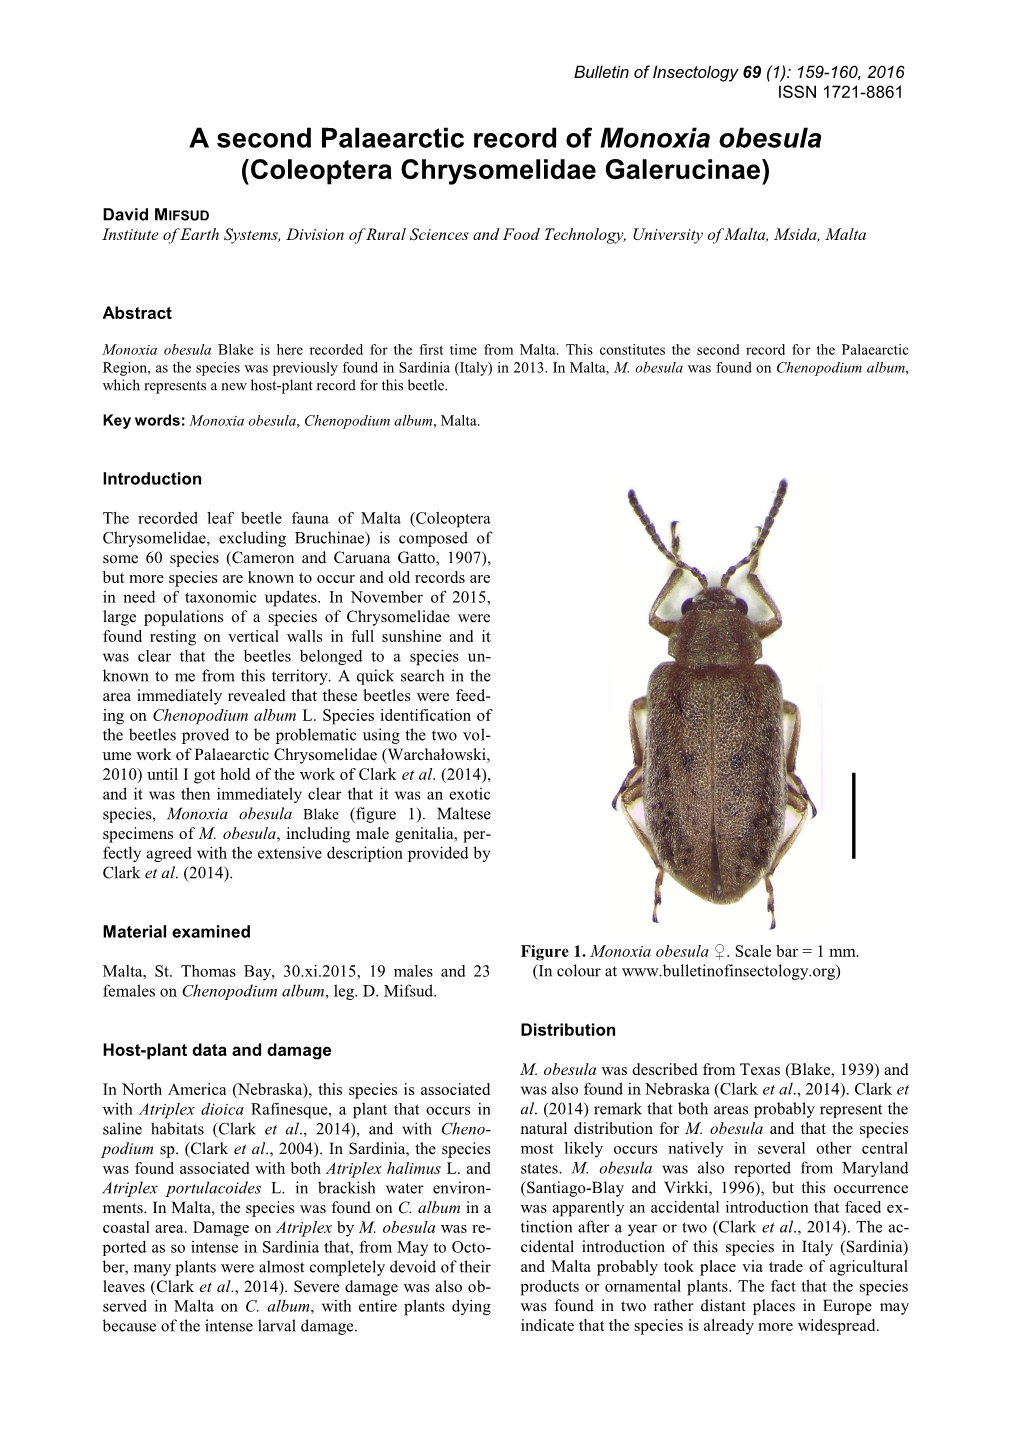 A Second Palaearctic Record of Monoxia Obesula (Coleoptera Chrysomelidae Galerucinae)